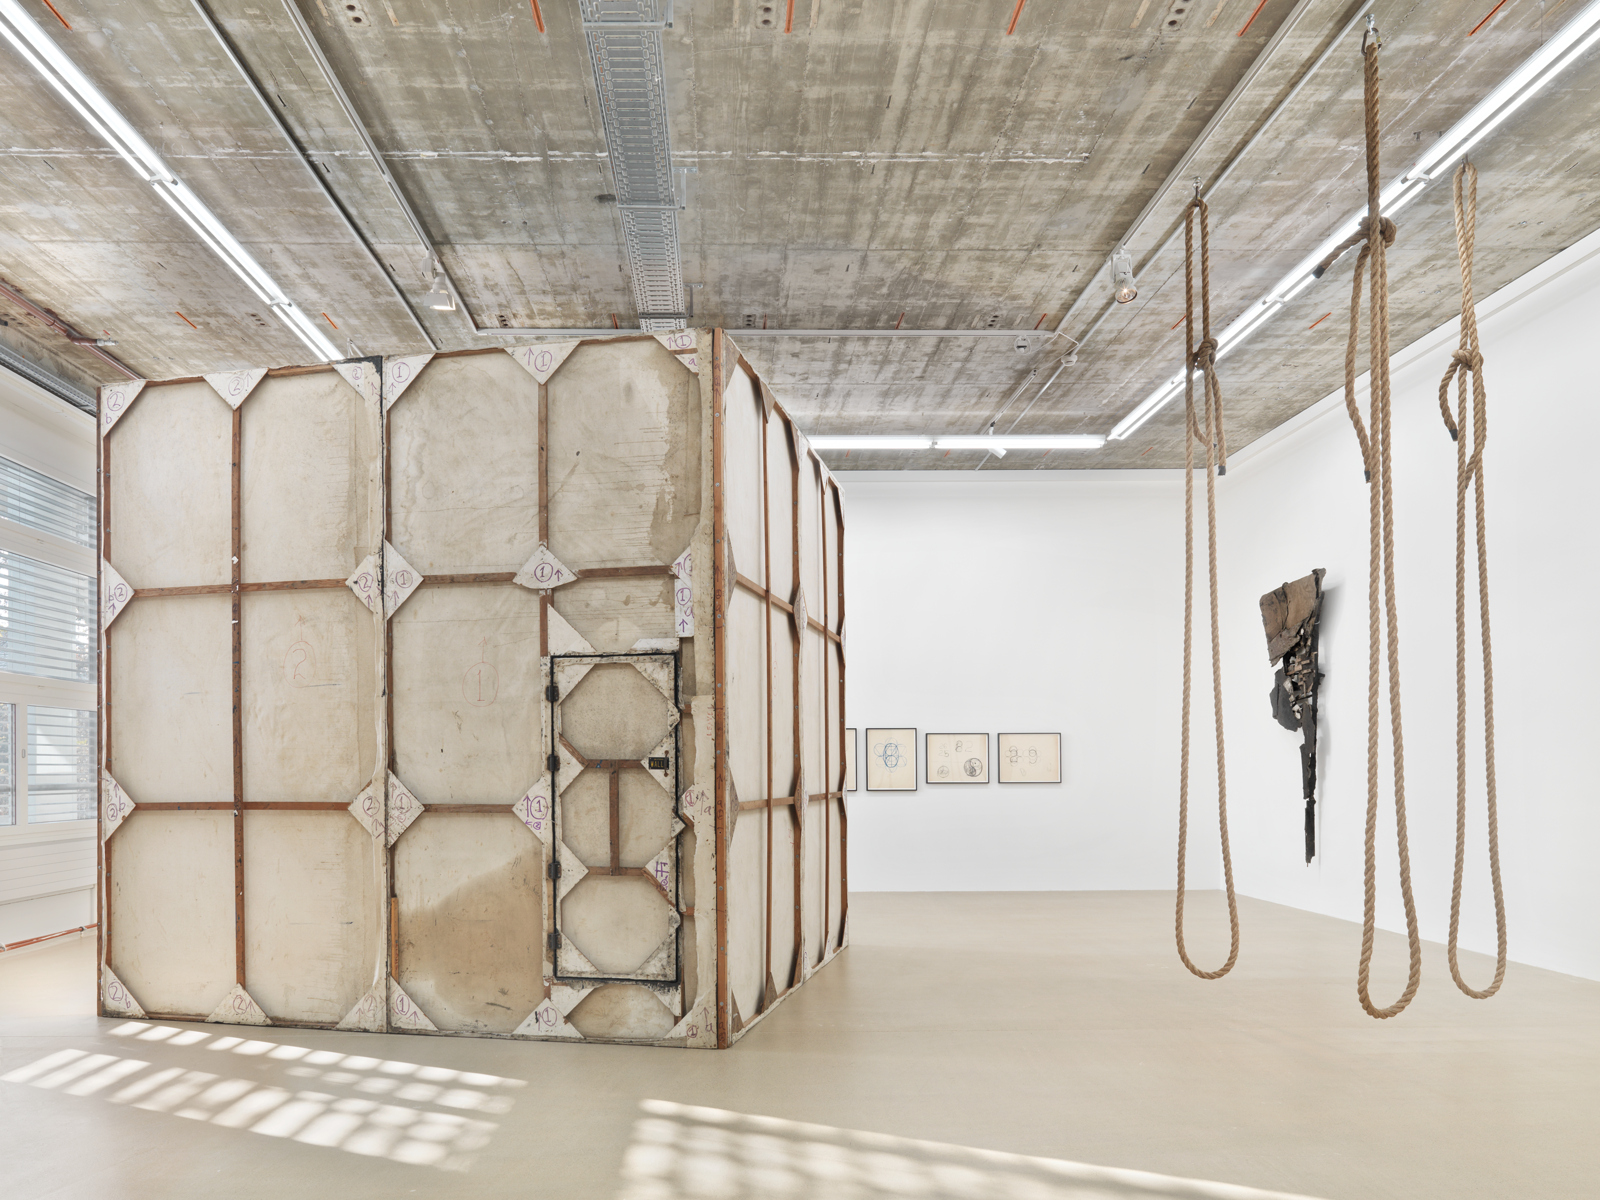 Various Artists / "The Historical Box", exhibition view, Hauser & Wirth Zürich / 2011